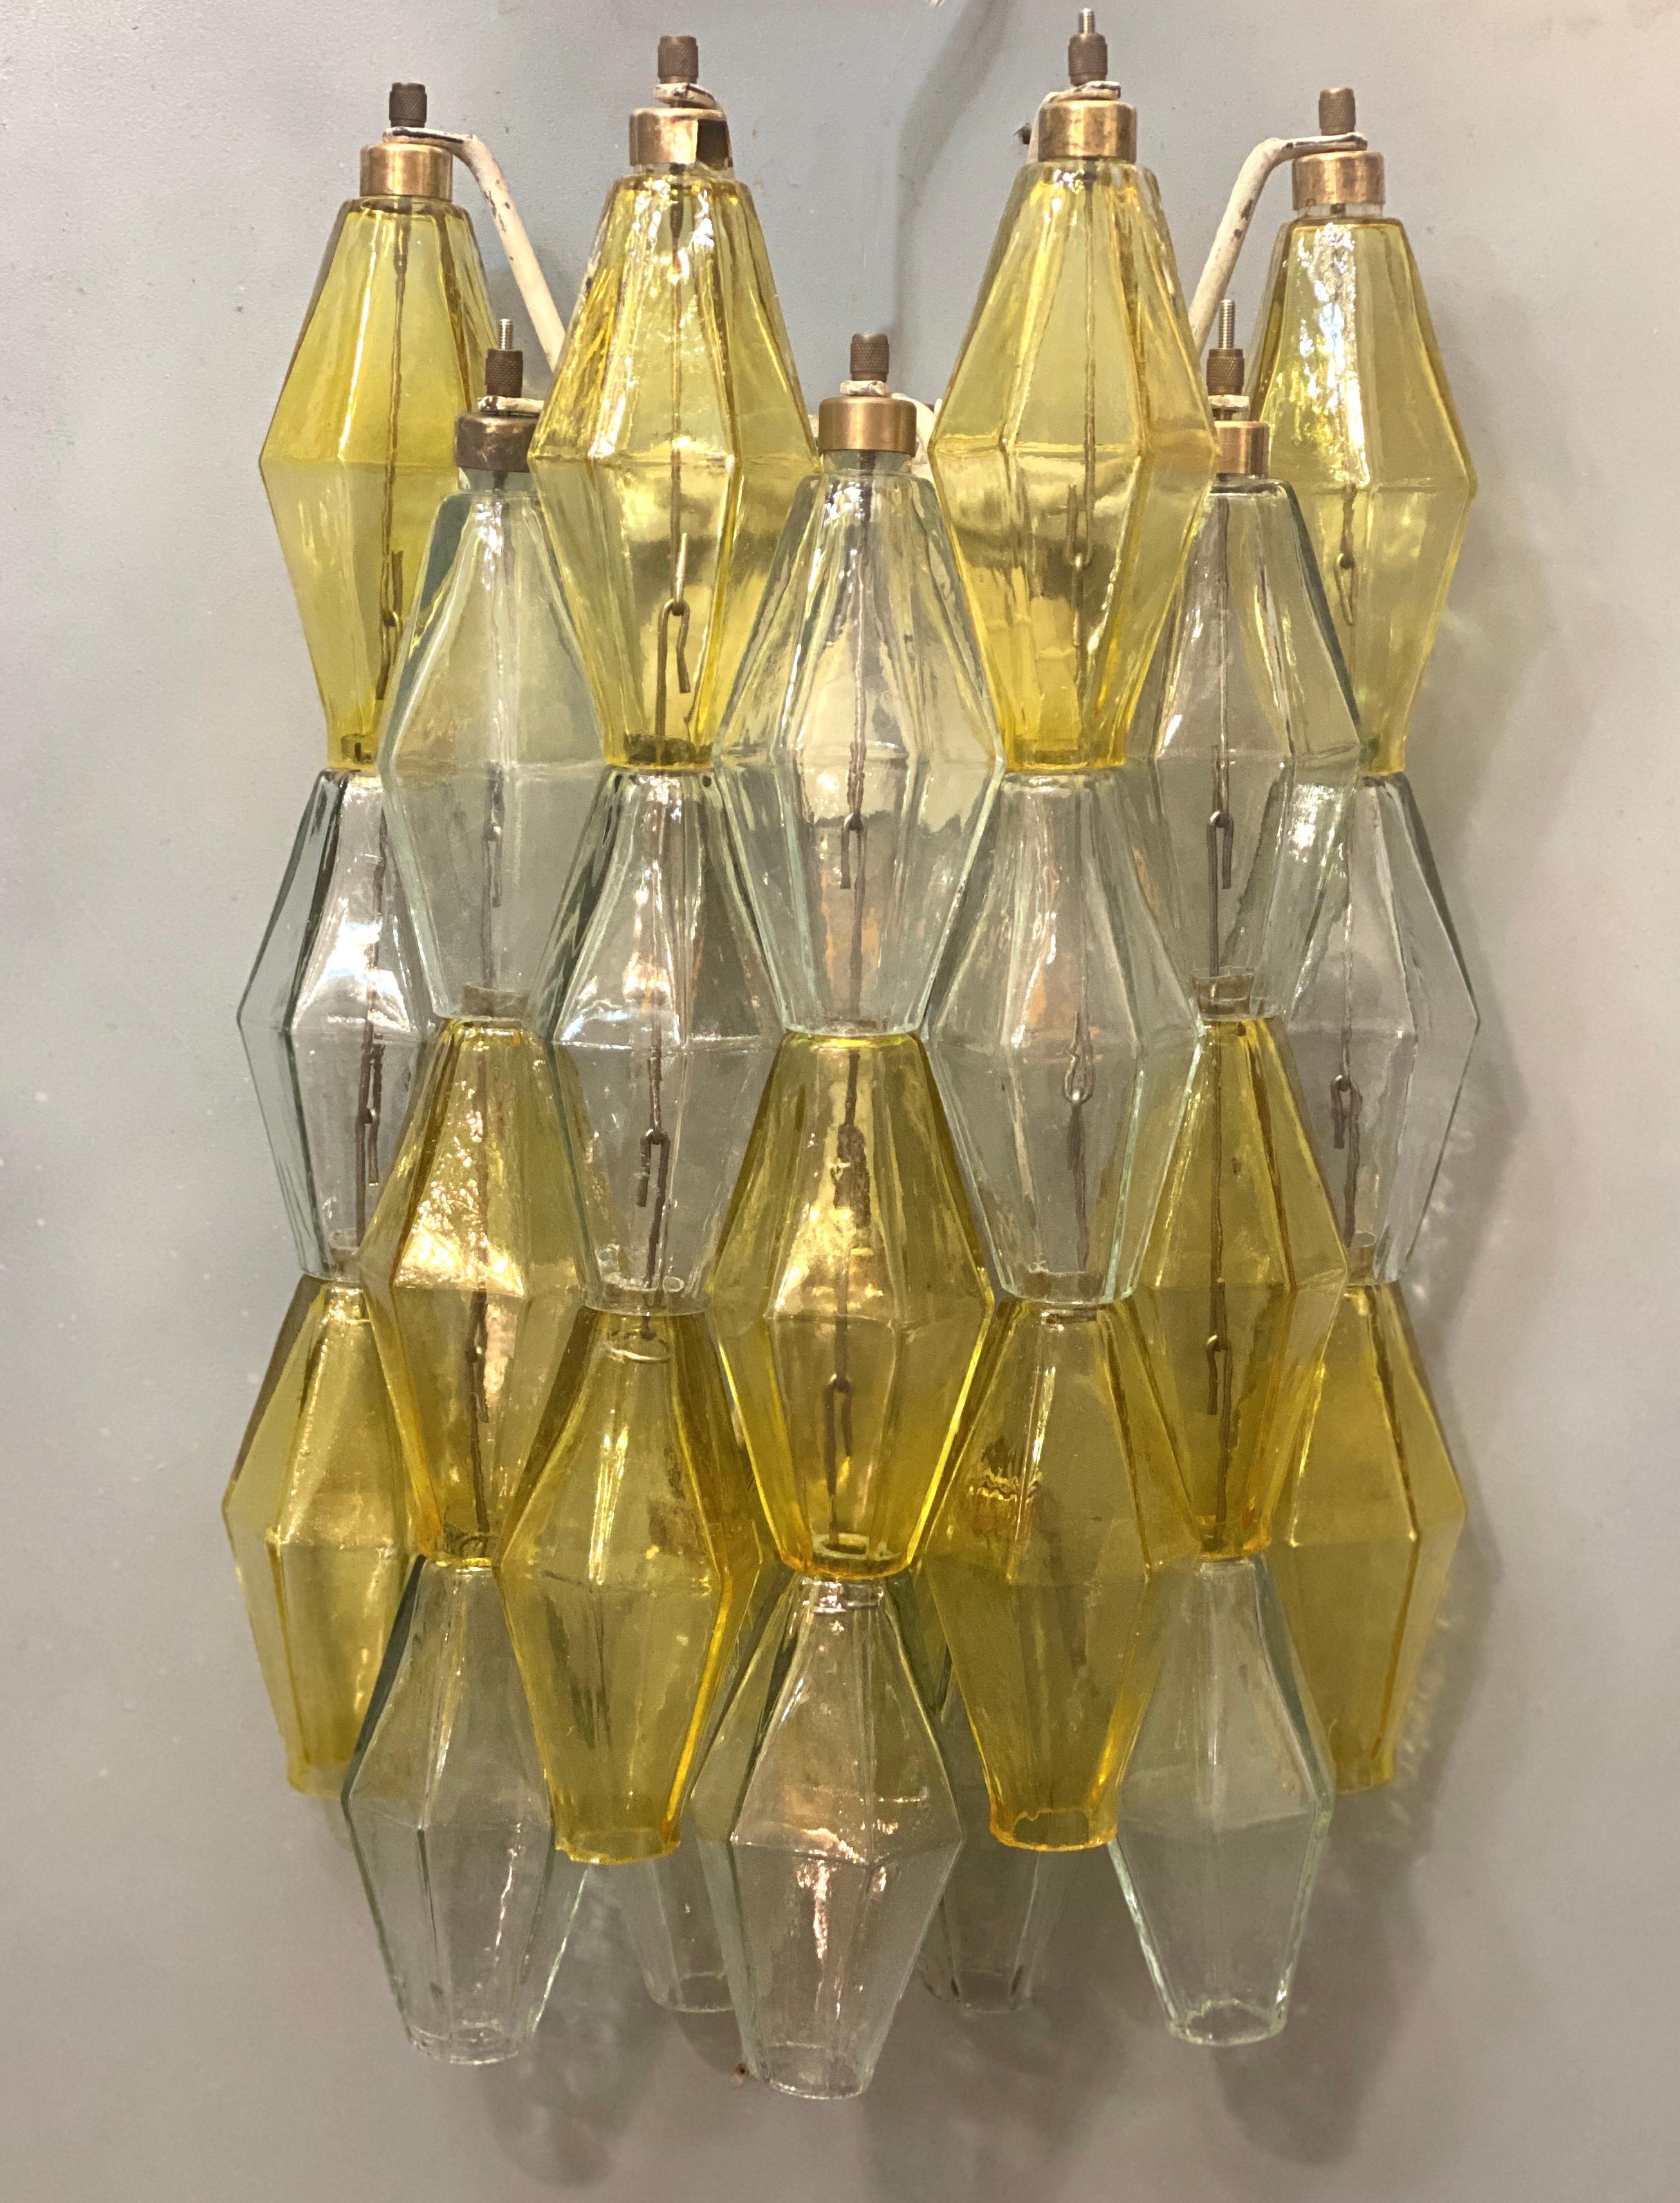 Amazing pair of poliedri wall lights. Rare combination of yellow amber and light blue color Murano glass.
Available four pairs and also a chandelier.
Provenance form a historic Roman Palace of the period.
This light fixture can be disassembled and